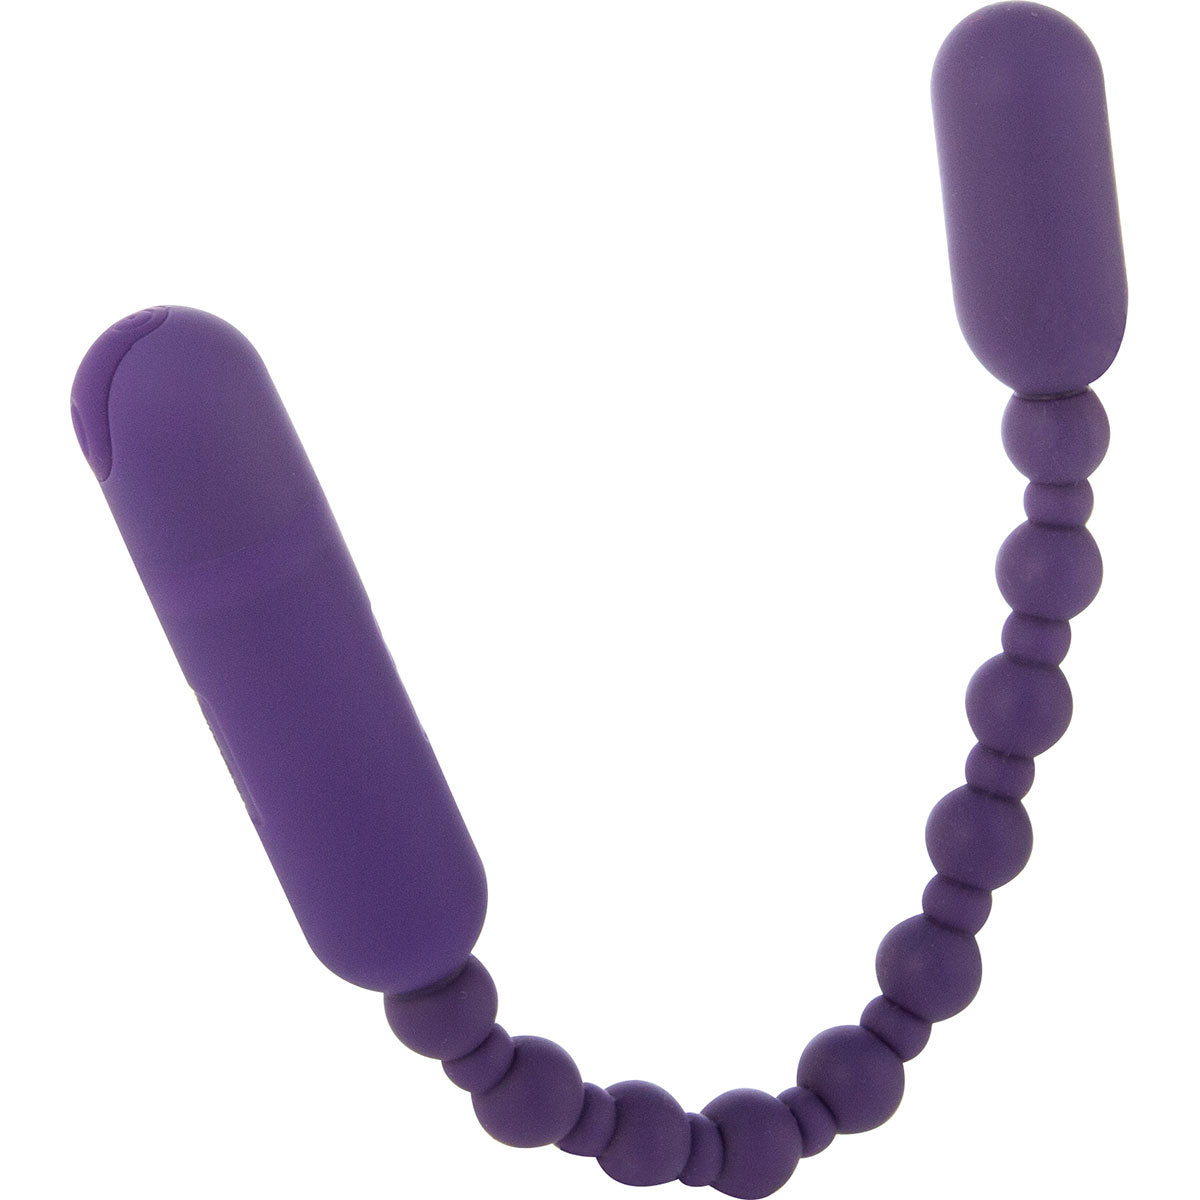 Booty Beads Rechargeable - Purple